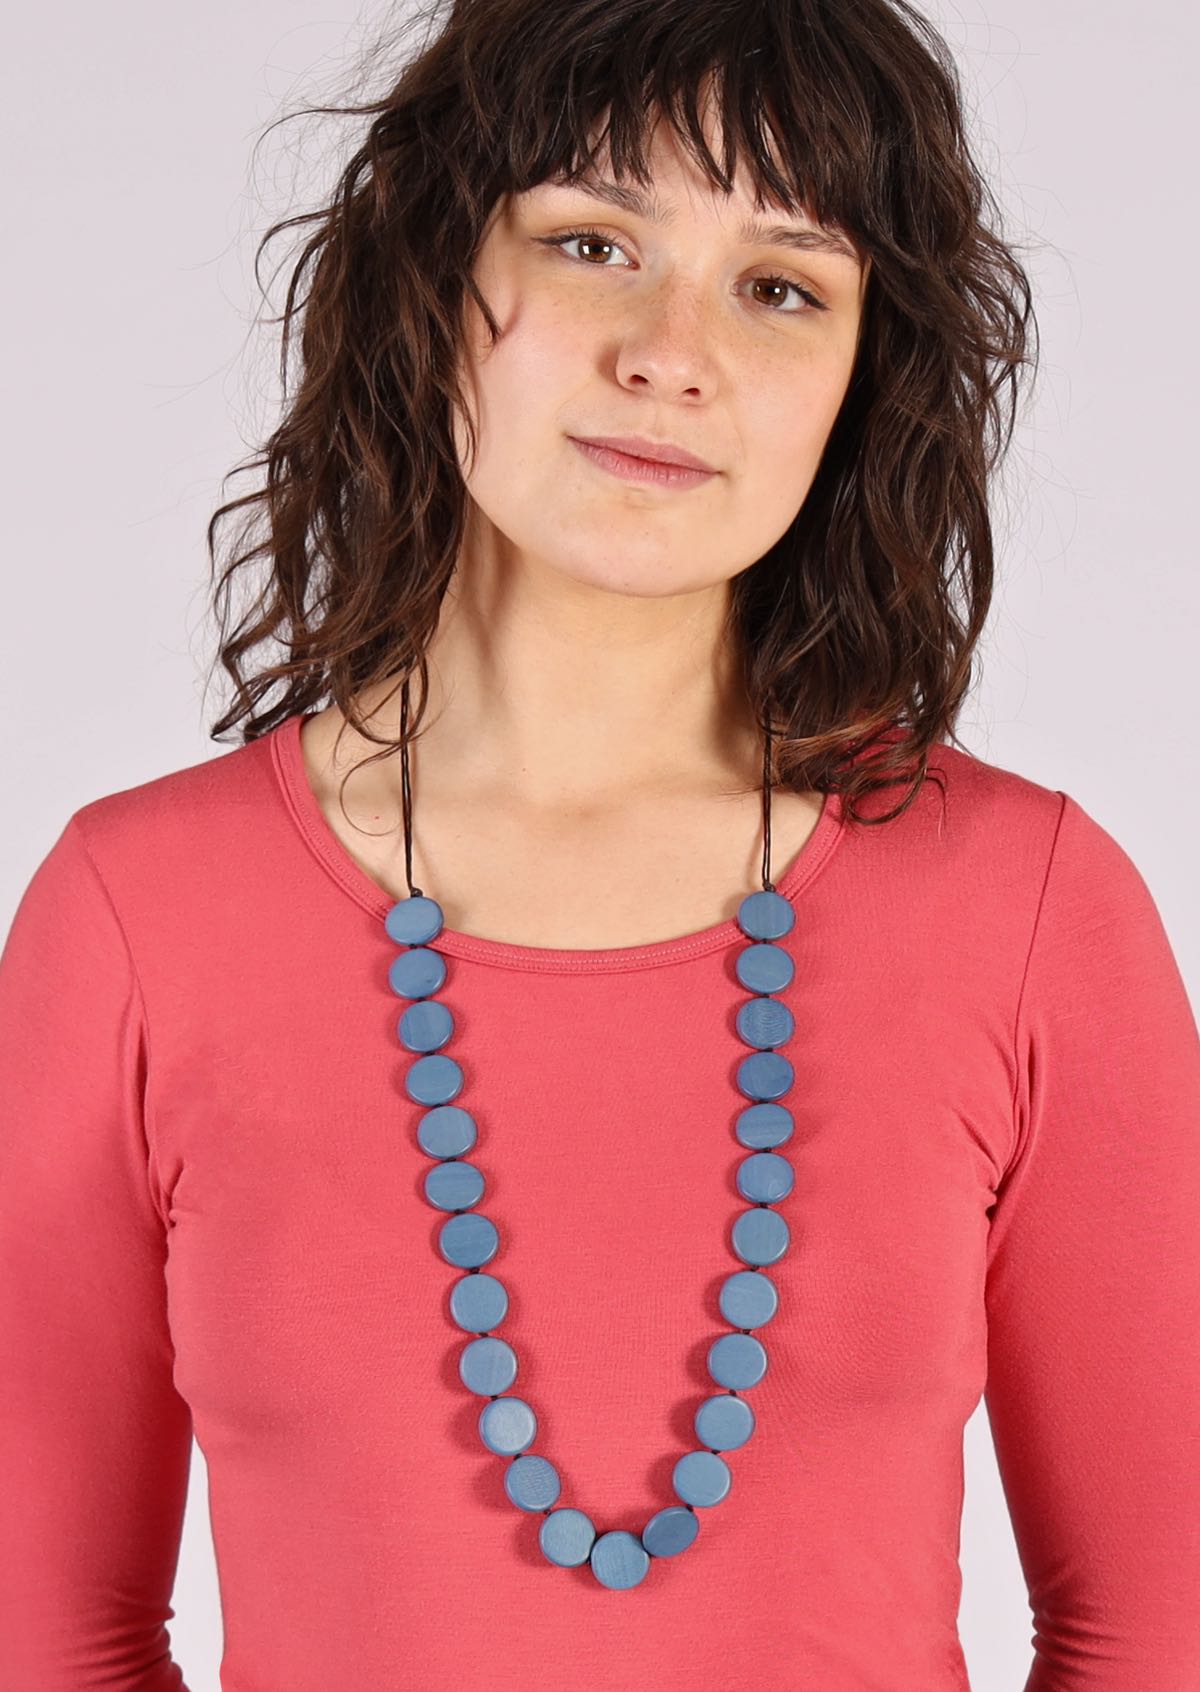 Pangantuon wood discs in muted blue long necklace